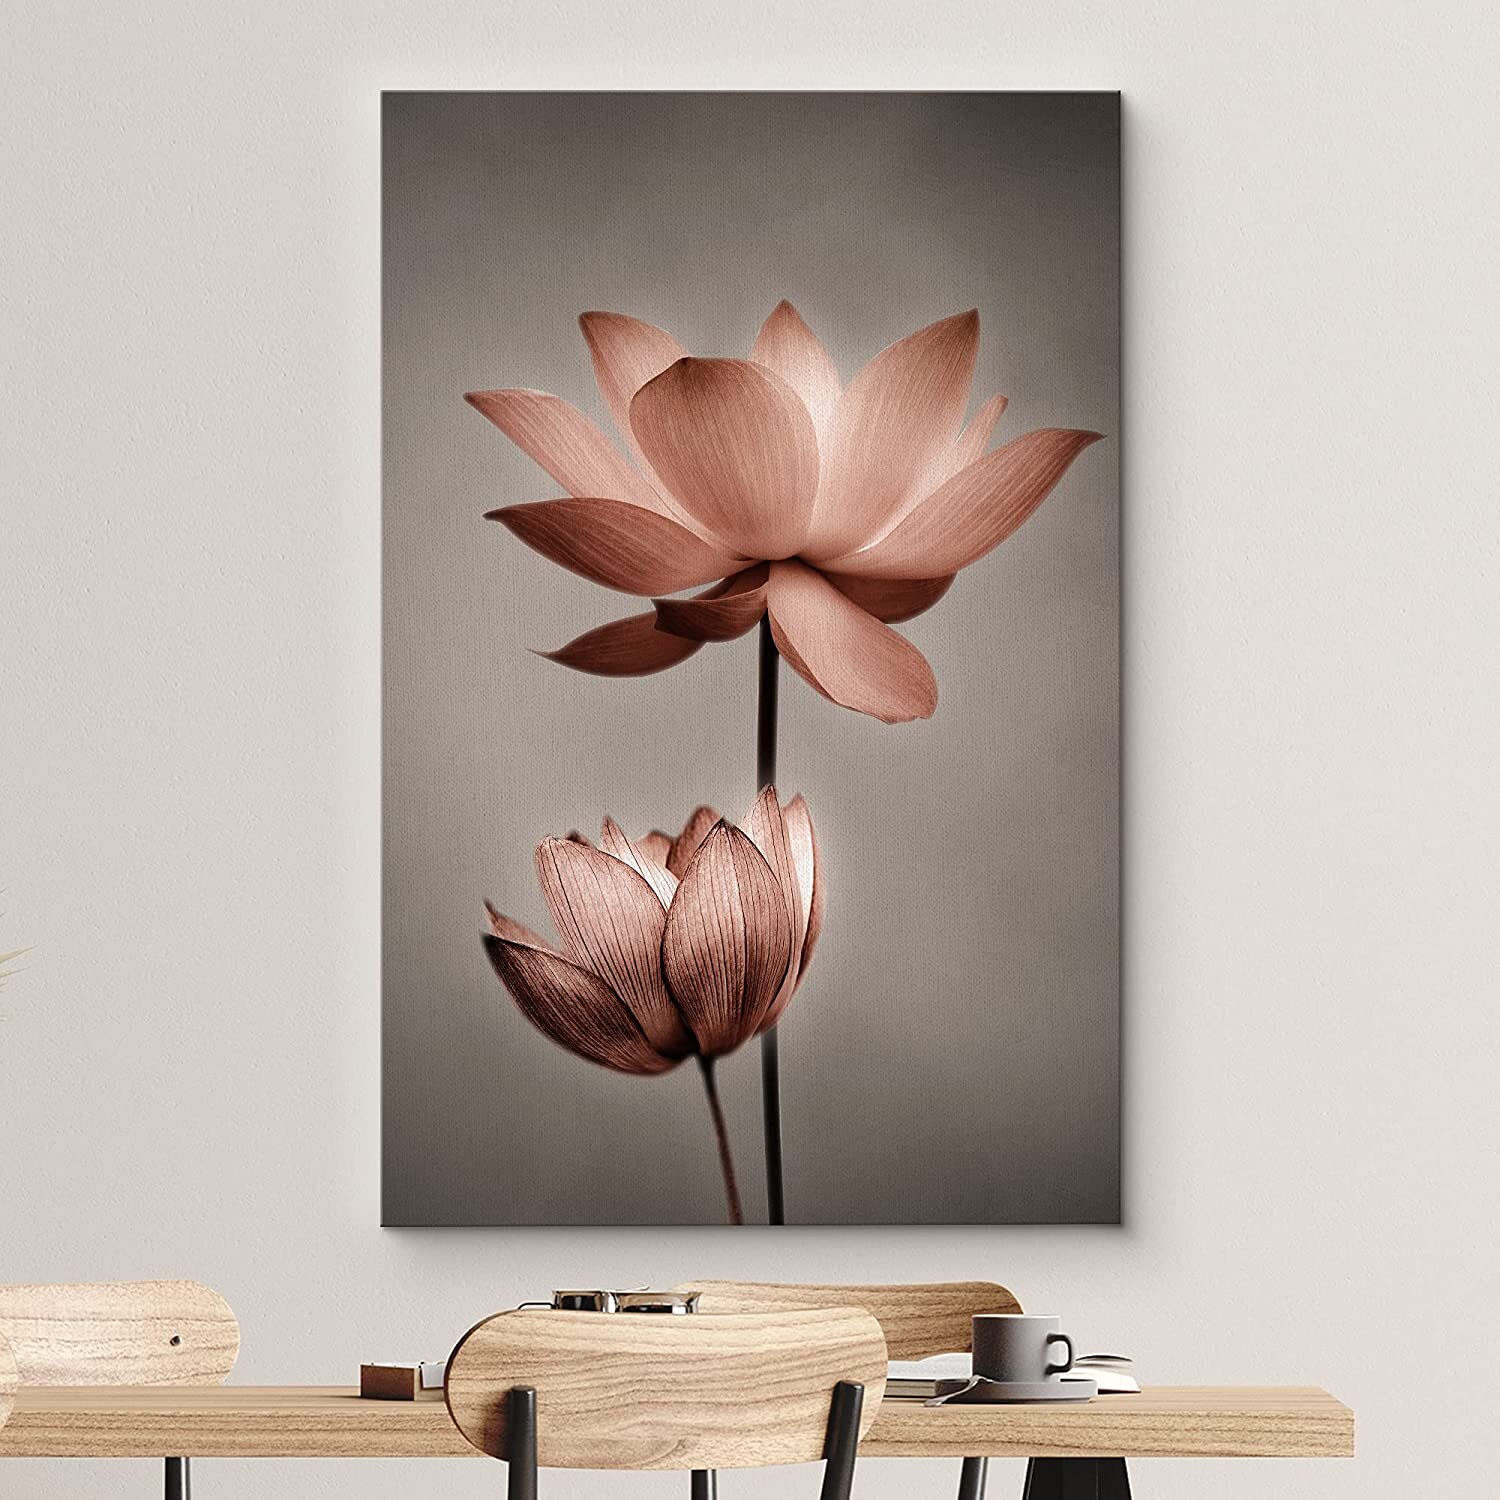 New Books Grey Rose Gold With Gr - Canvas Art Print